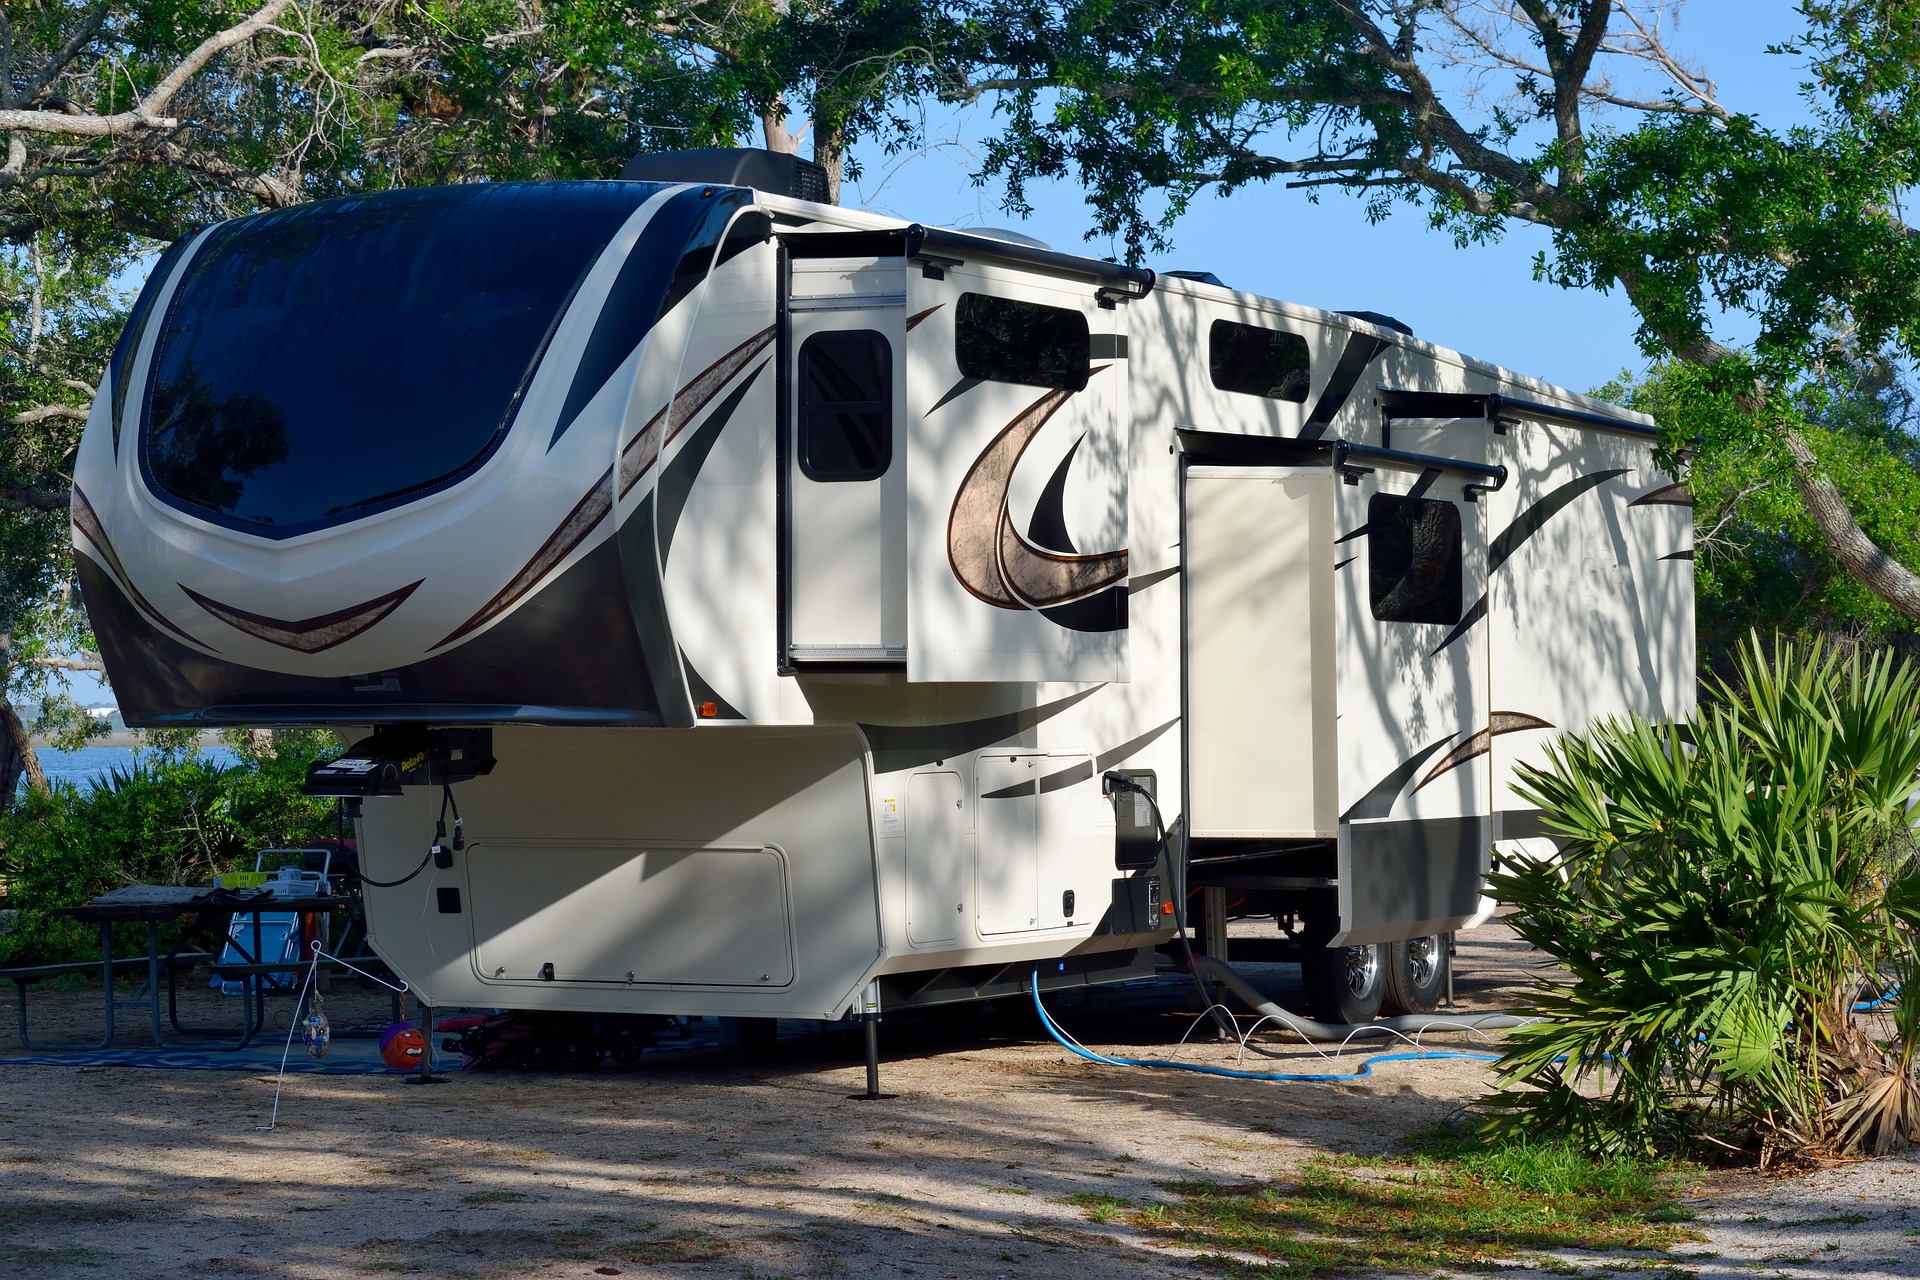 Towables Vs Motorhomes: The Pros And Cons